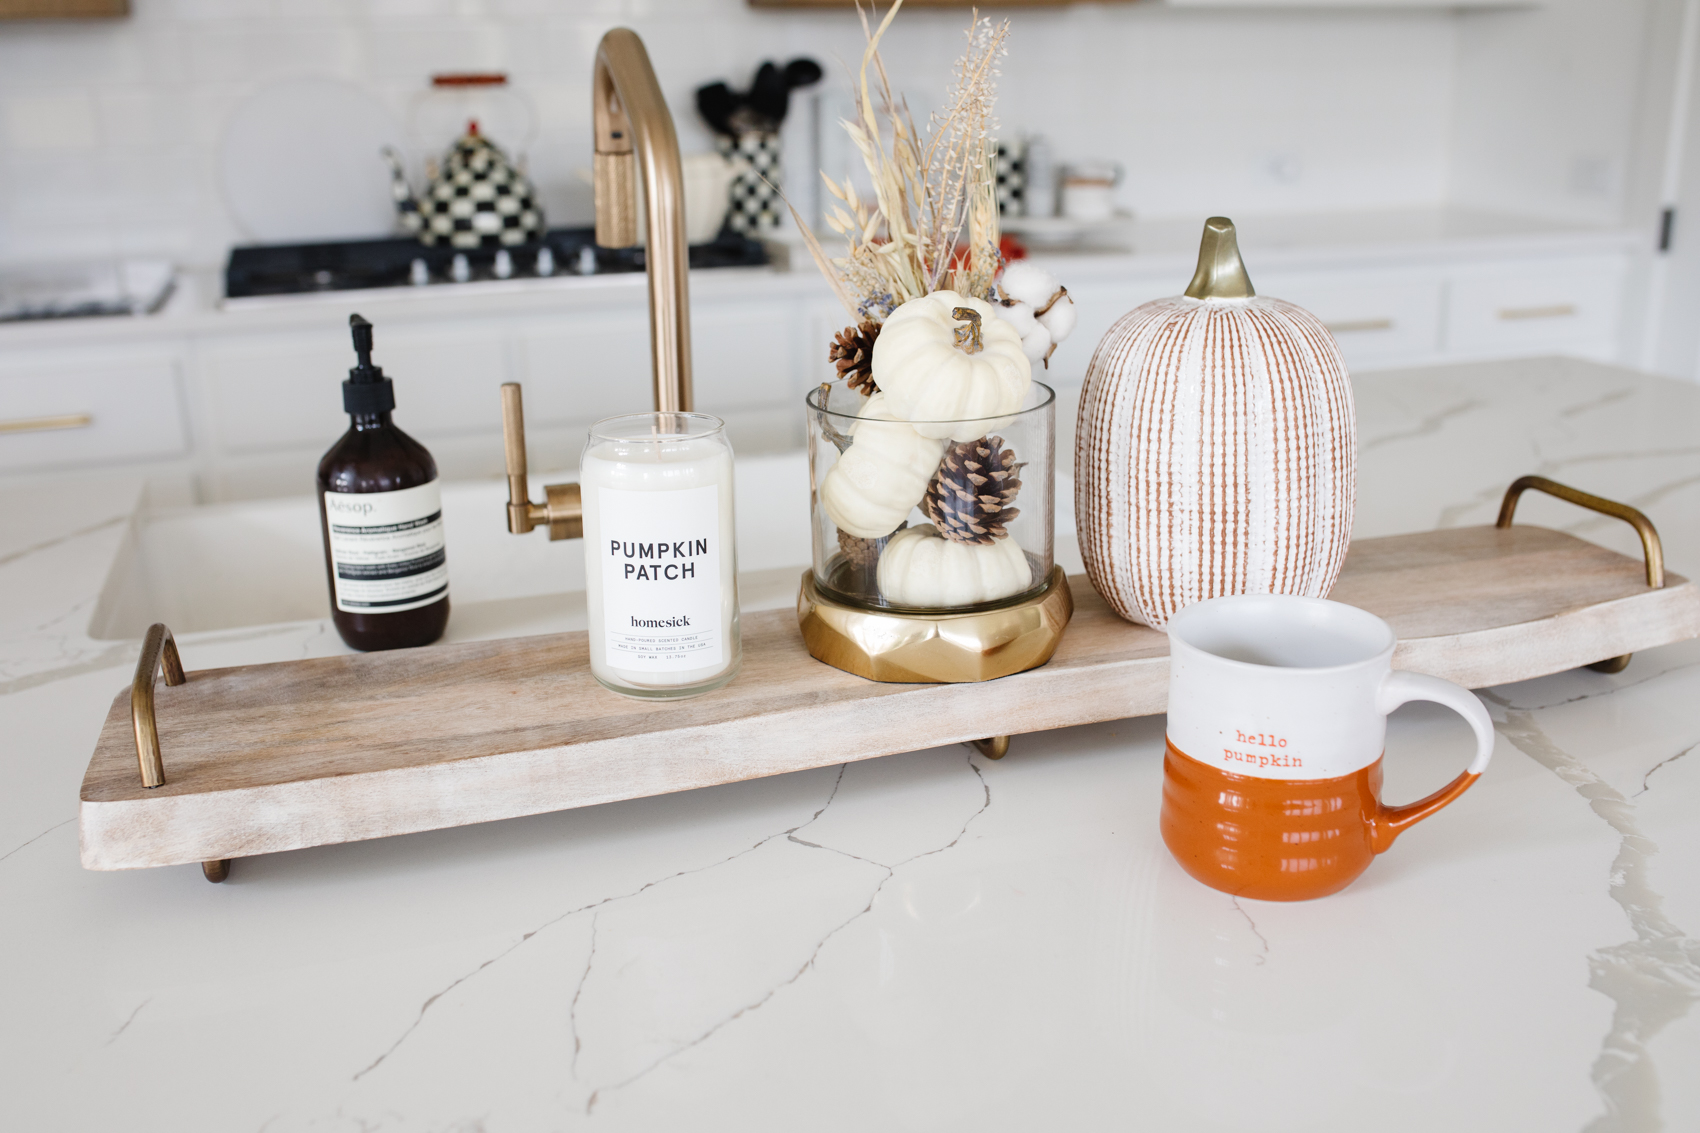 Kitchen fall decor with Aesop reverence soap, white ceramic pumpkins, pumpkin patch candle, cheeseboard and MacKenzie-Childs items